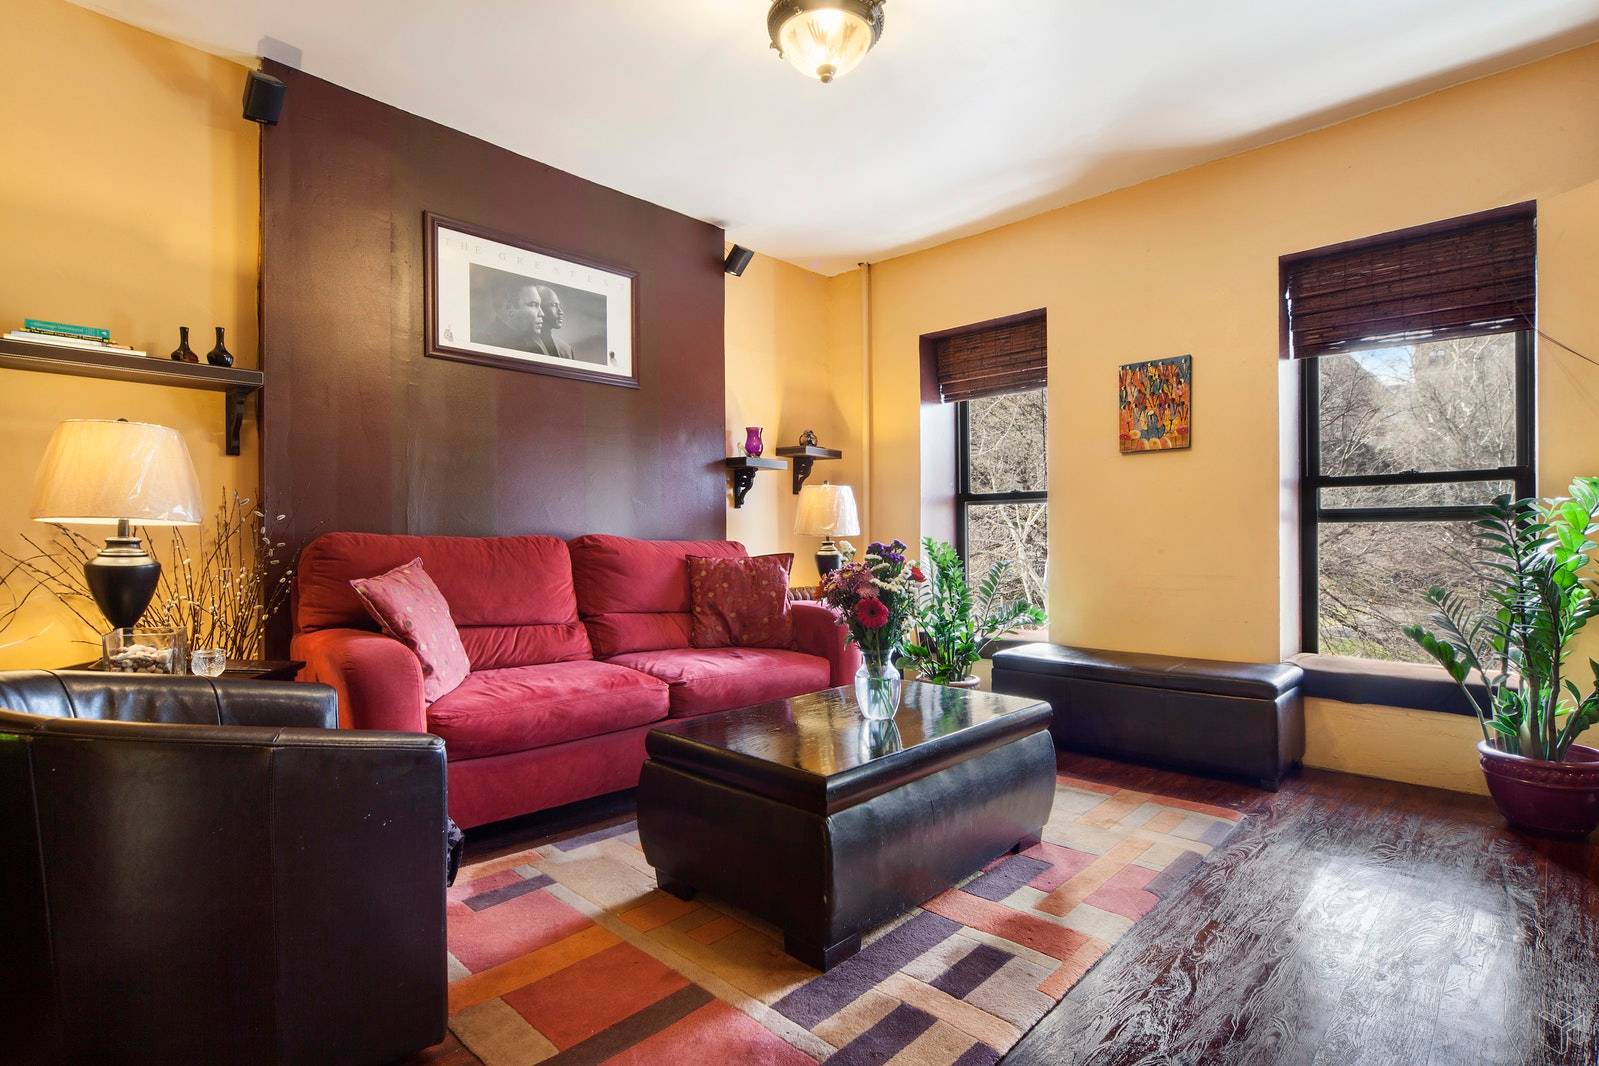 3 Bedrooms, High Ceilings across from gorgeous Morningside Park !